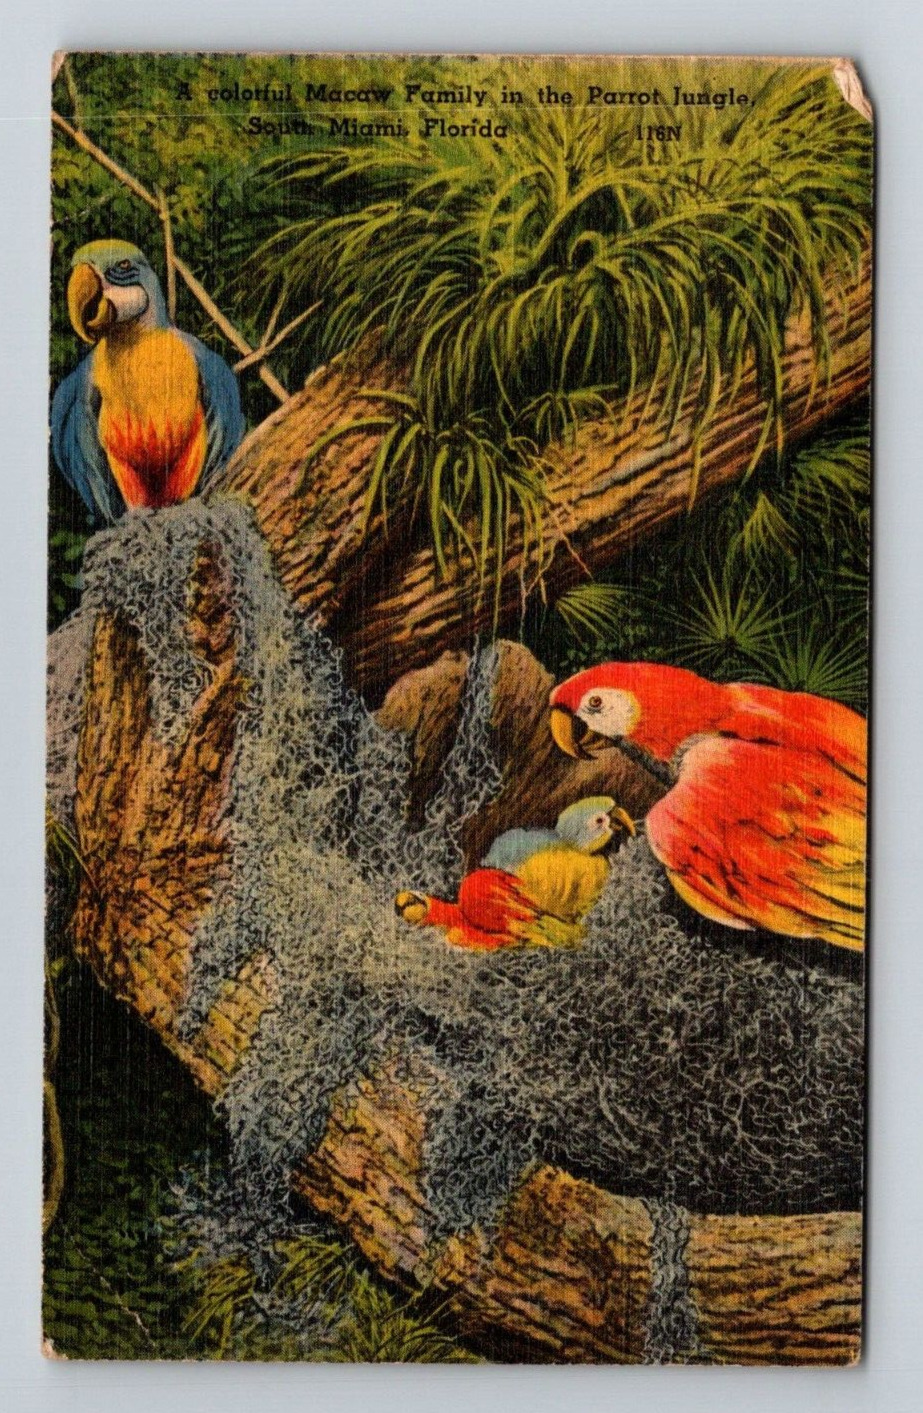 posted linen postcard 5.5x3.5 inches Miami Florida Parrot Jungle